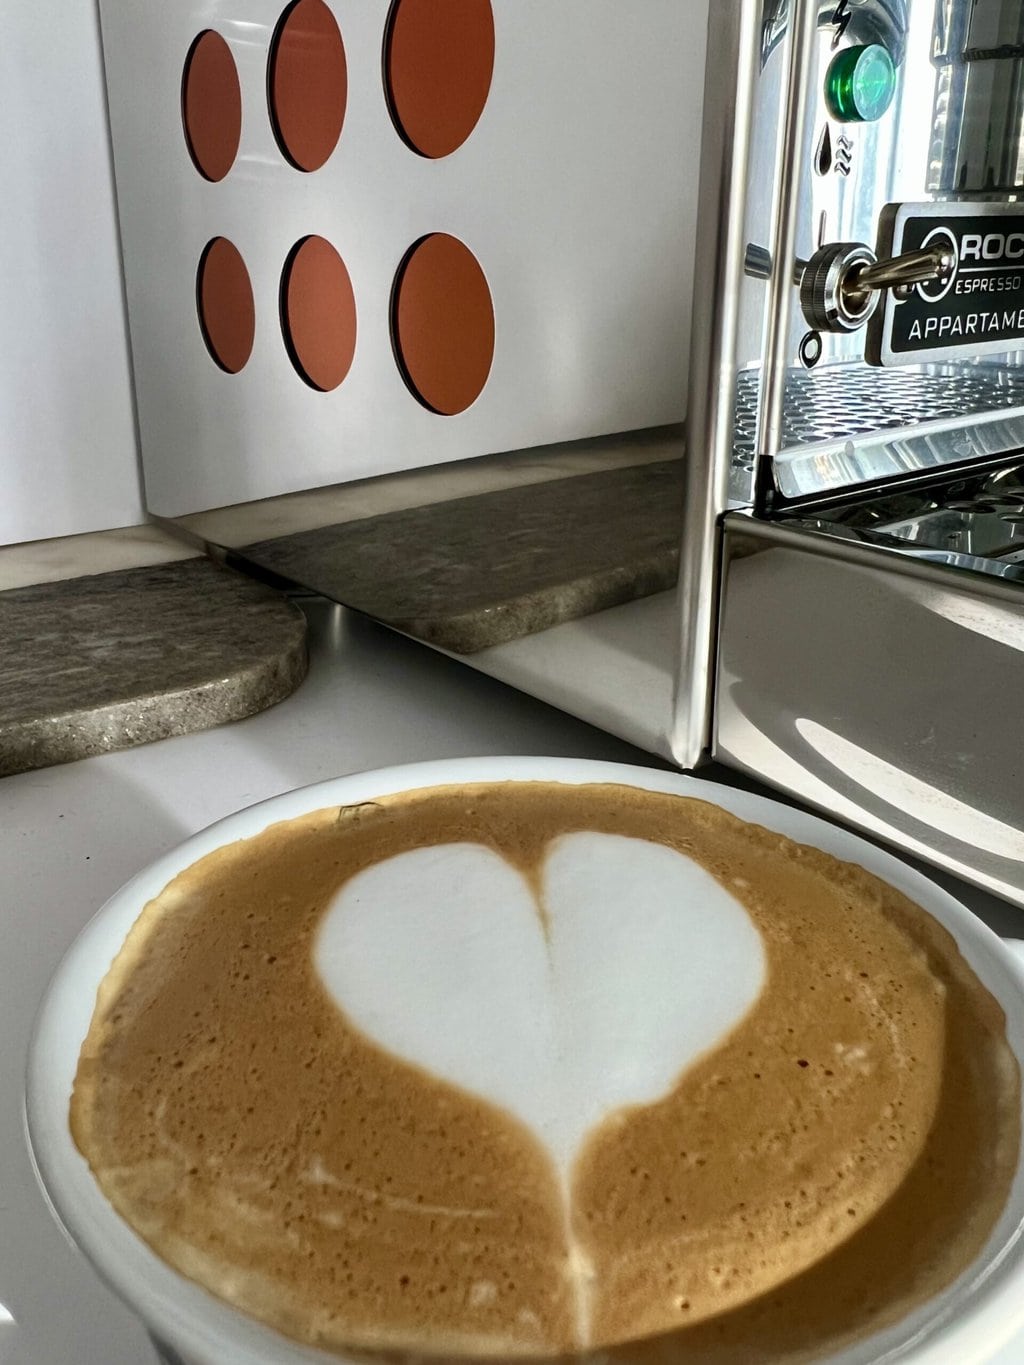 a cup of coffee with a heart on the foam against the background of the Rocket Espresso Appartamento coffee machine